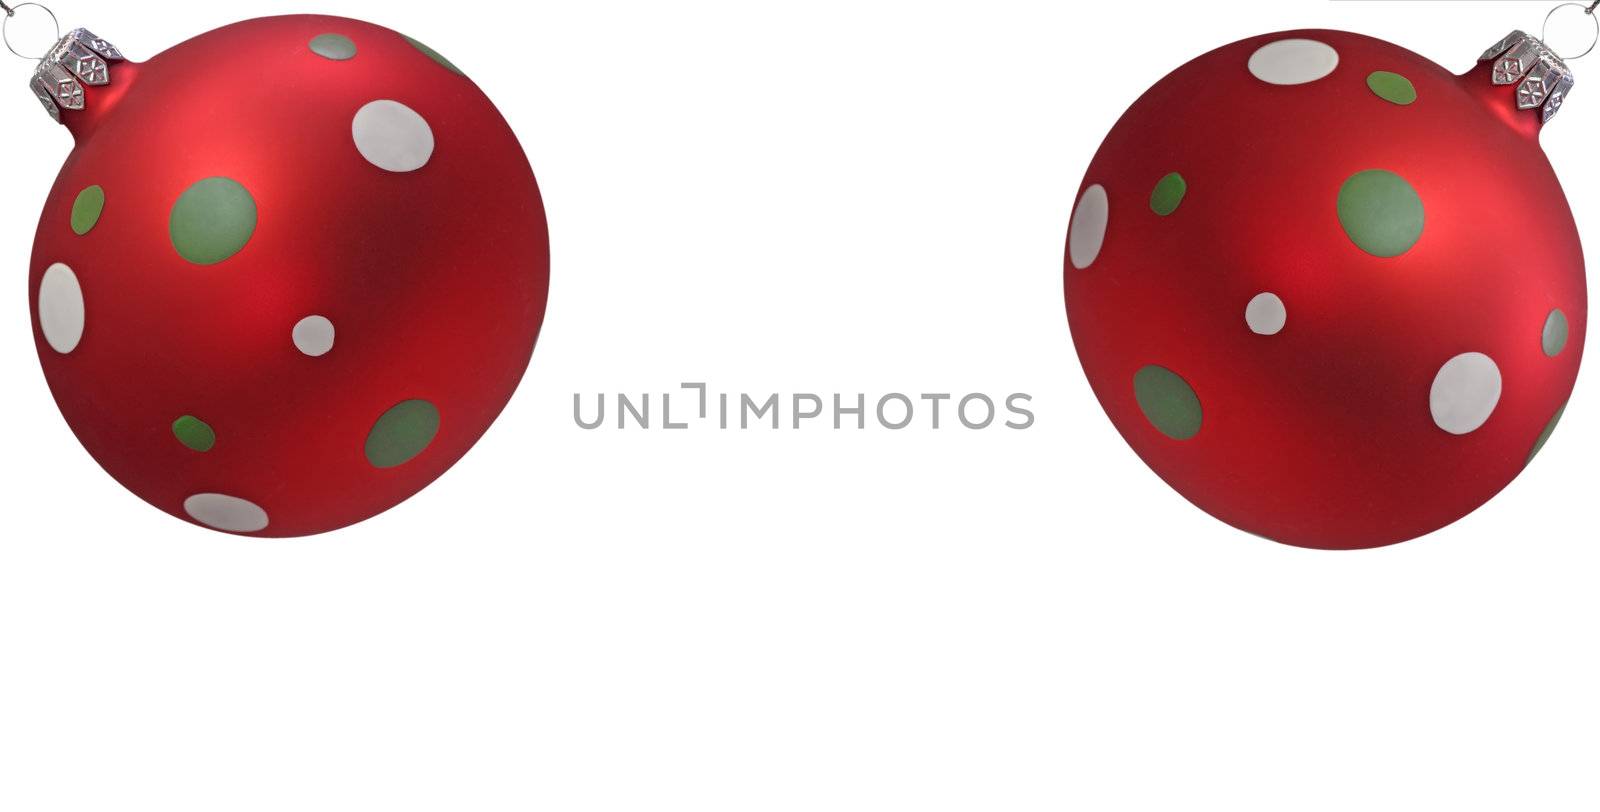 Two red christmas tree balls with spots, isolated on white background